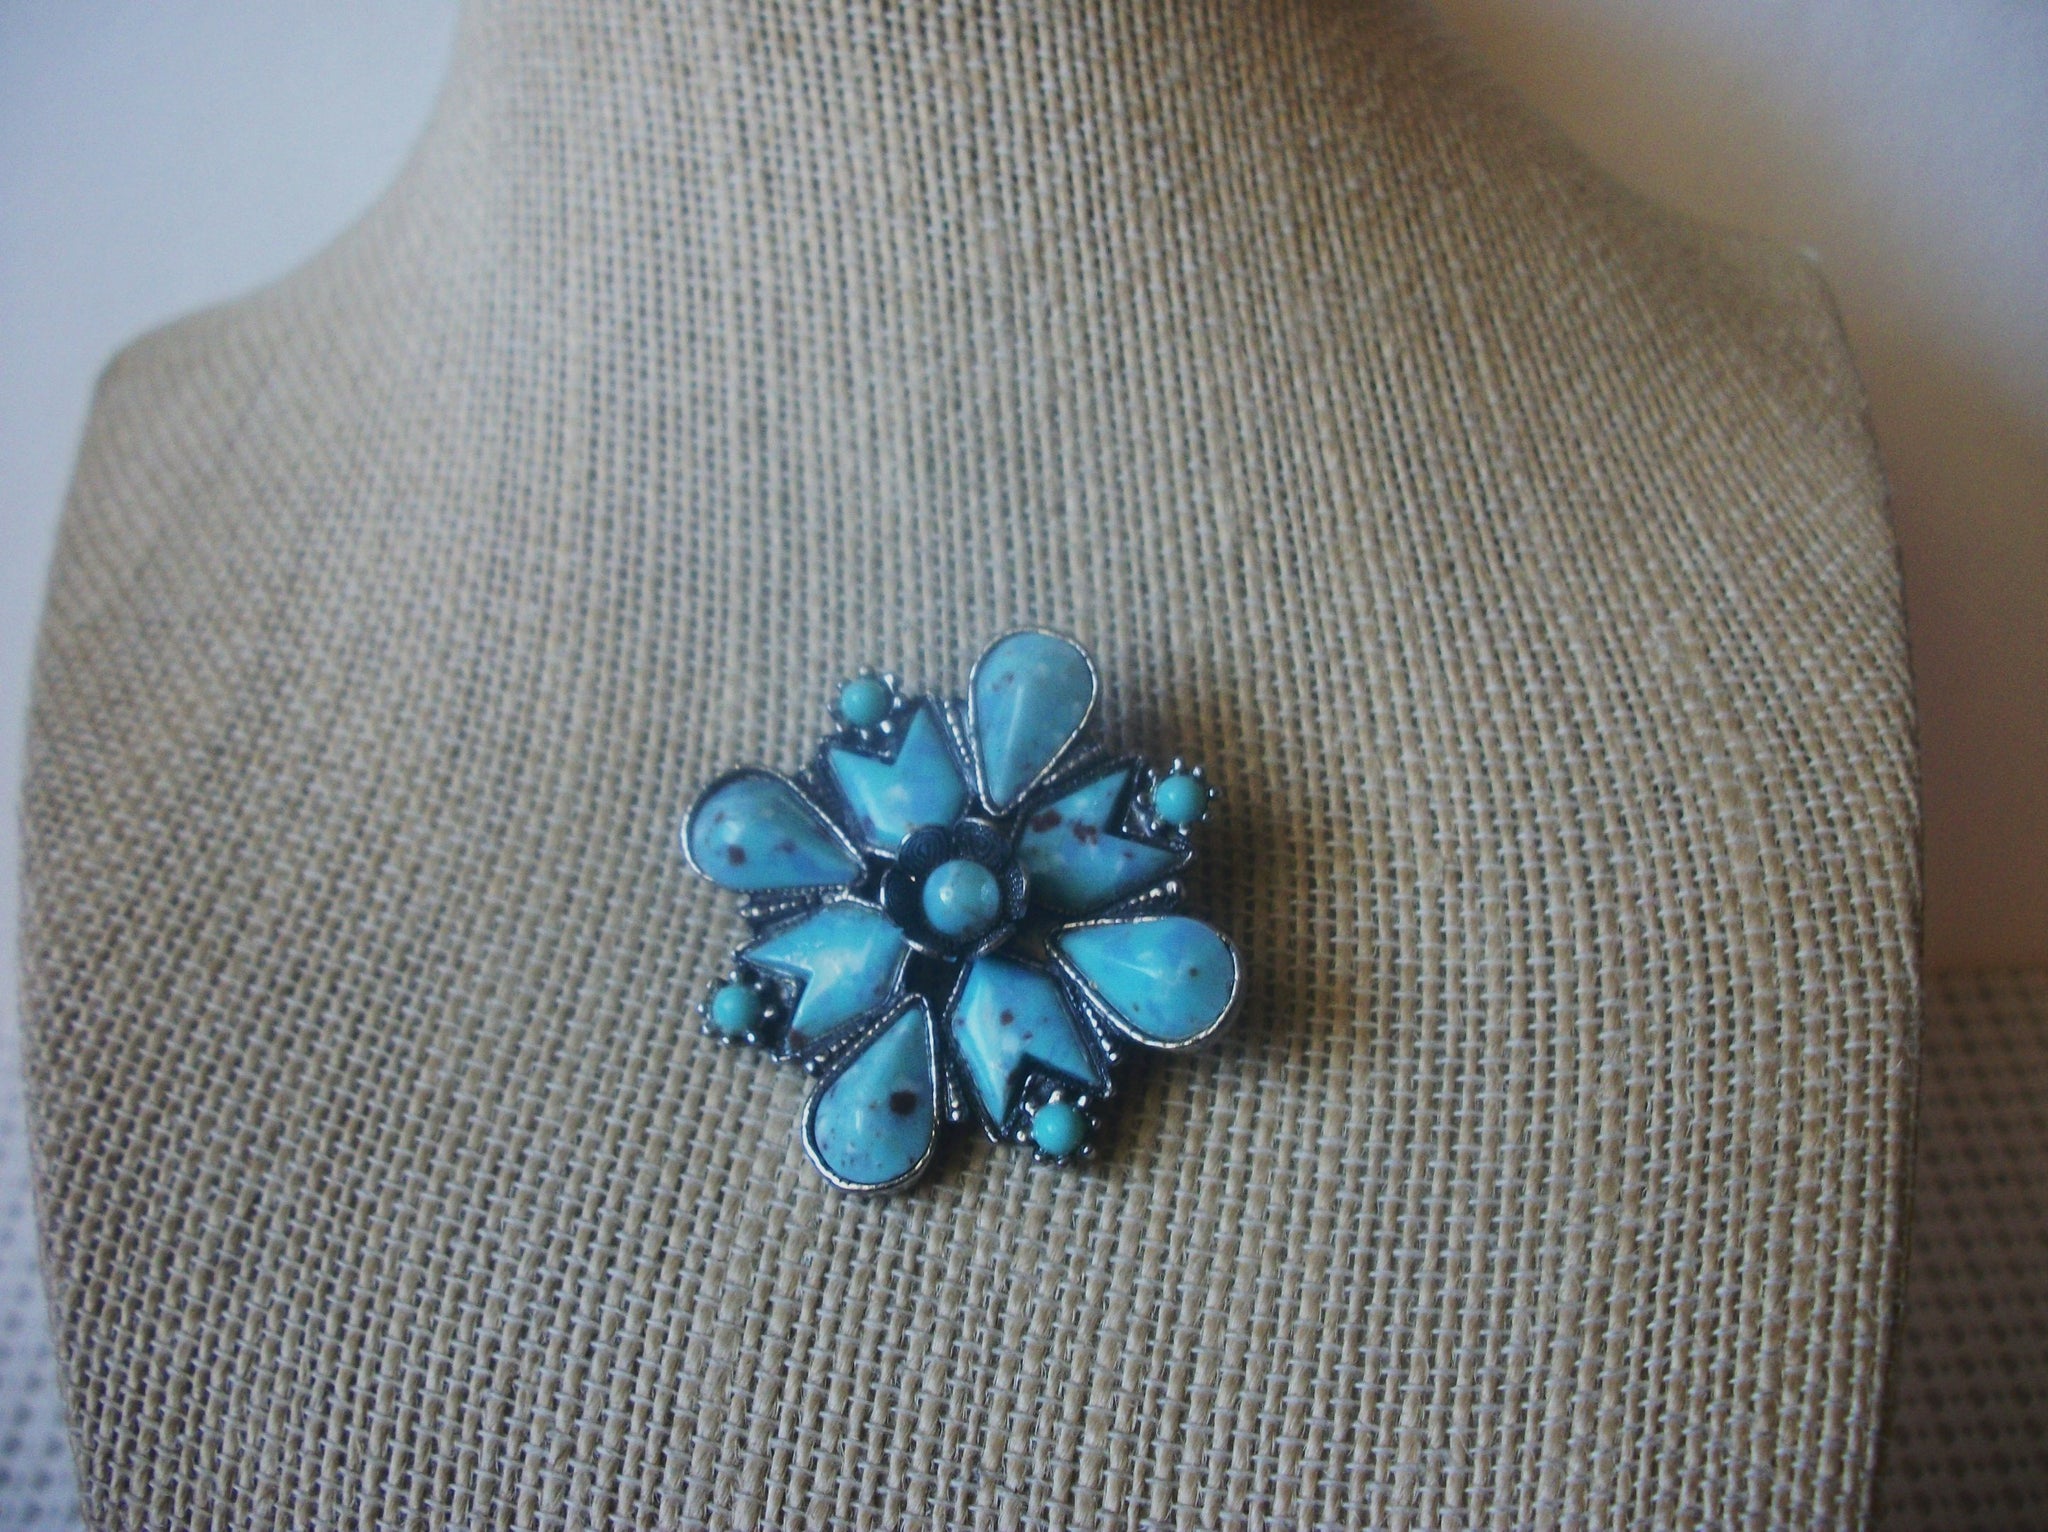 Vintage Brooch Pin, Southwestern Turquoise Stone Floral 52017